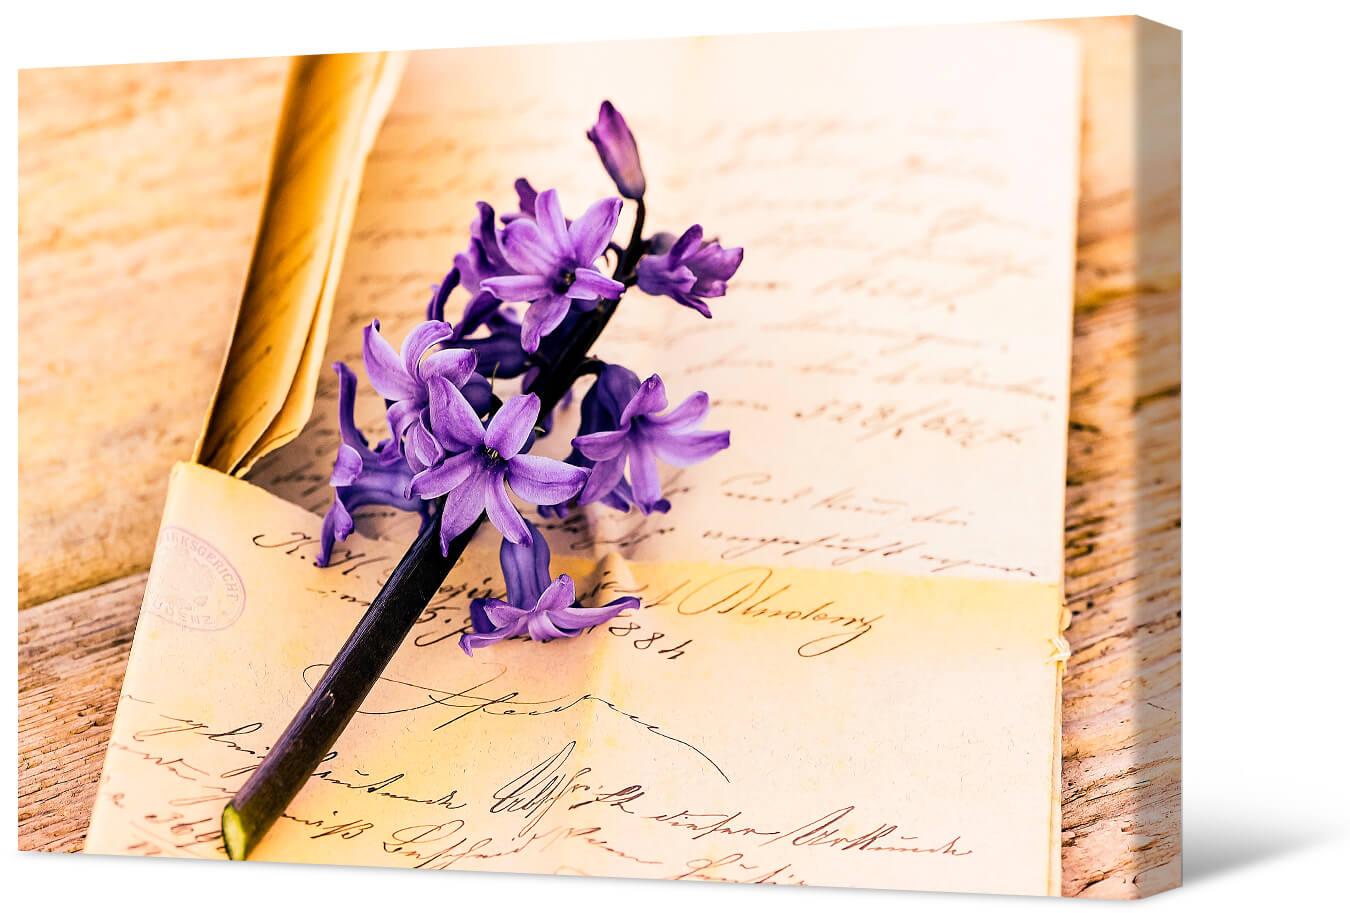 Picture Letter and hyacinth inflorescence